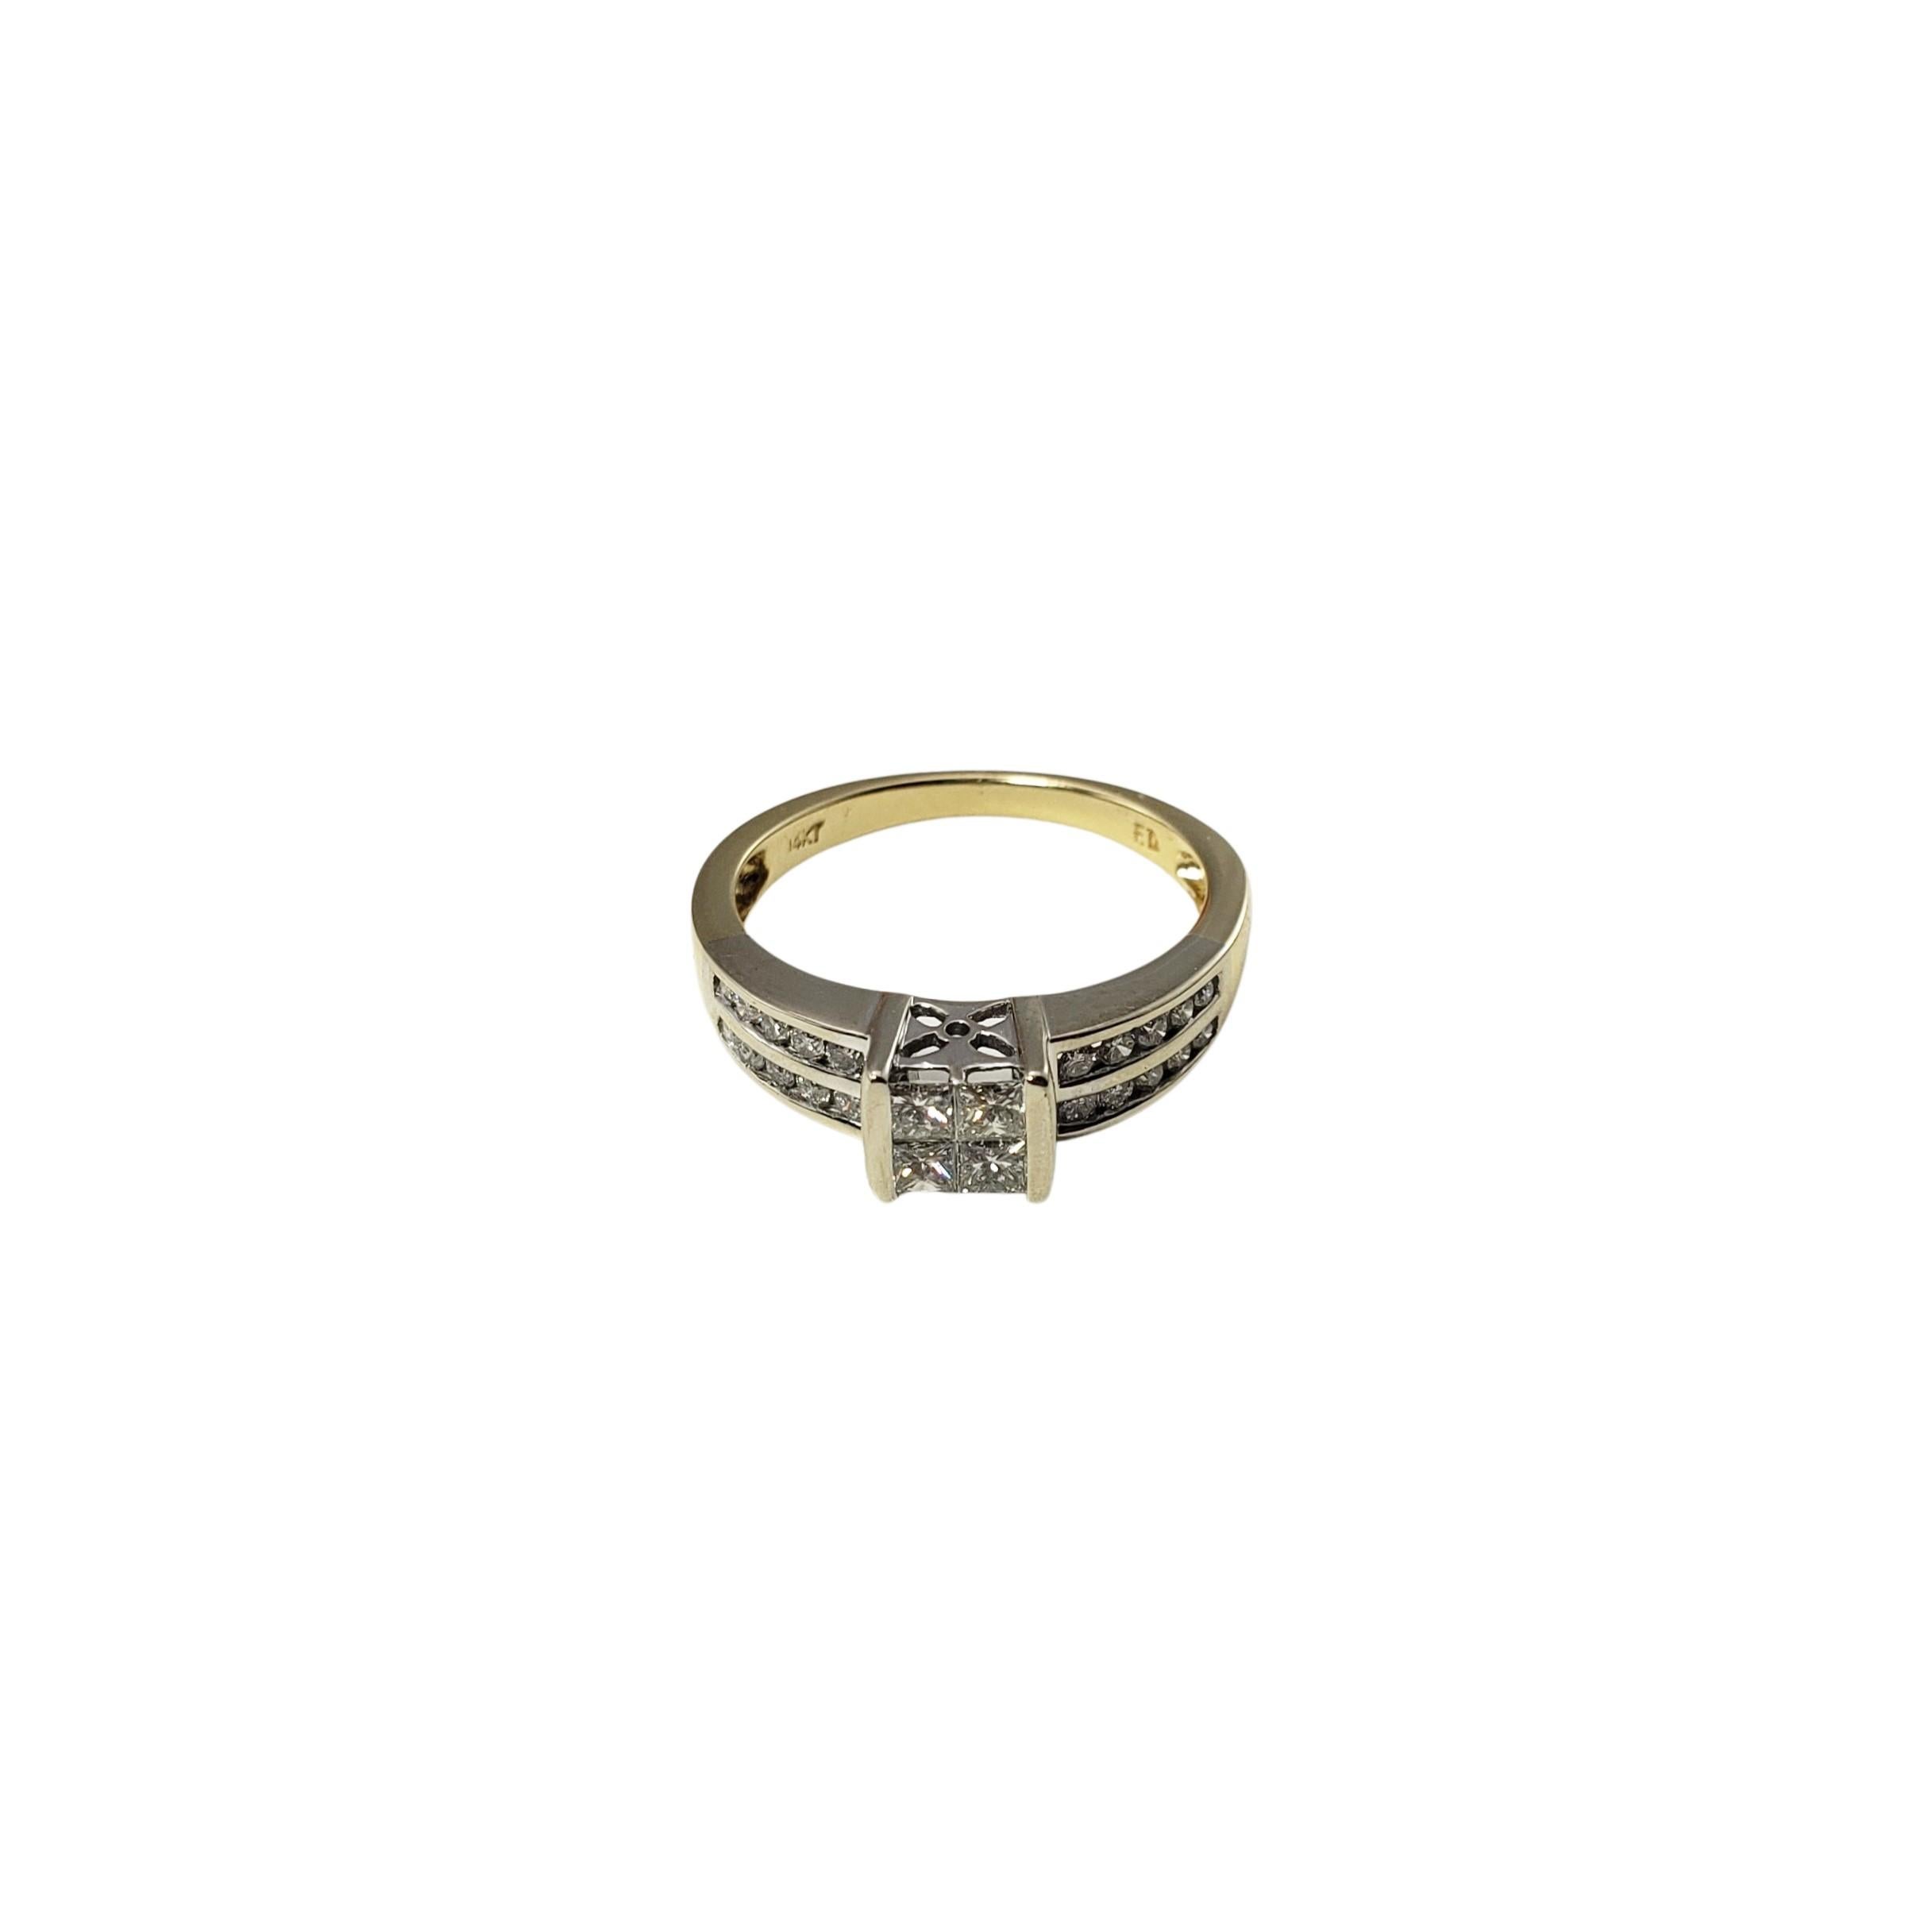 14 Karat White and Yellow Gold and Diamond Ring Size 6.75-

This sparkling ring features four princess cut diamonds and 20 round brilliant cut diamonds set in classic 14K yellow and white gold.  
Width:  5 mm.  Shank:  2 mm.

Approximate total